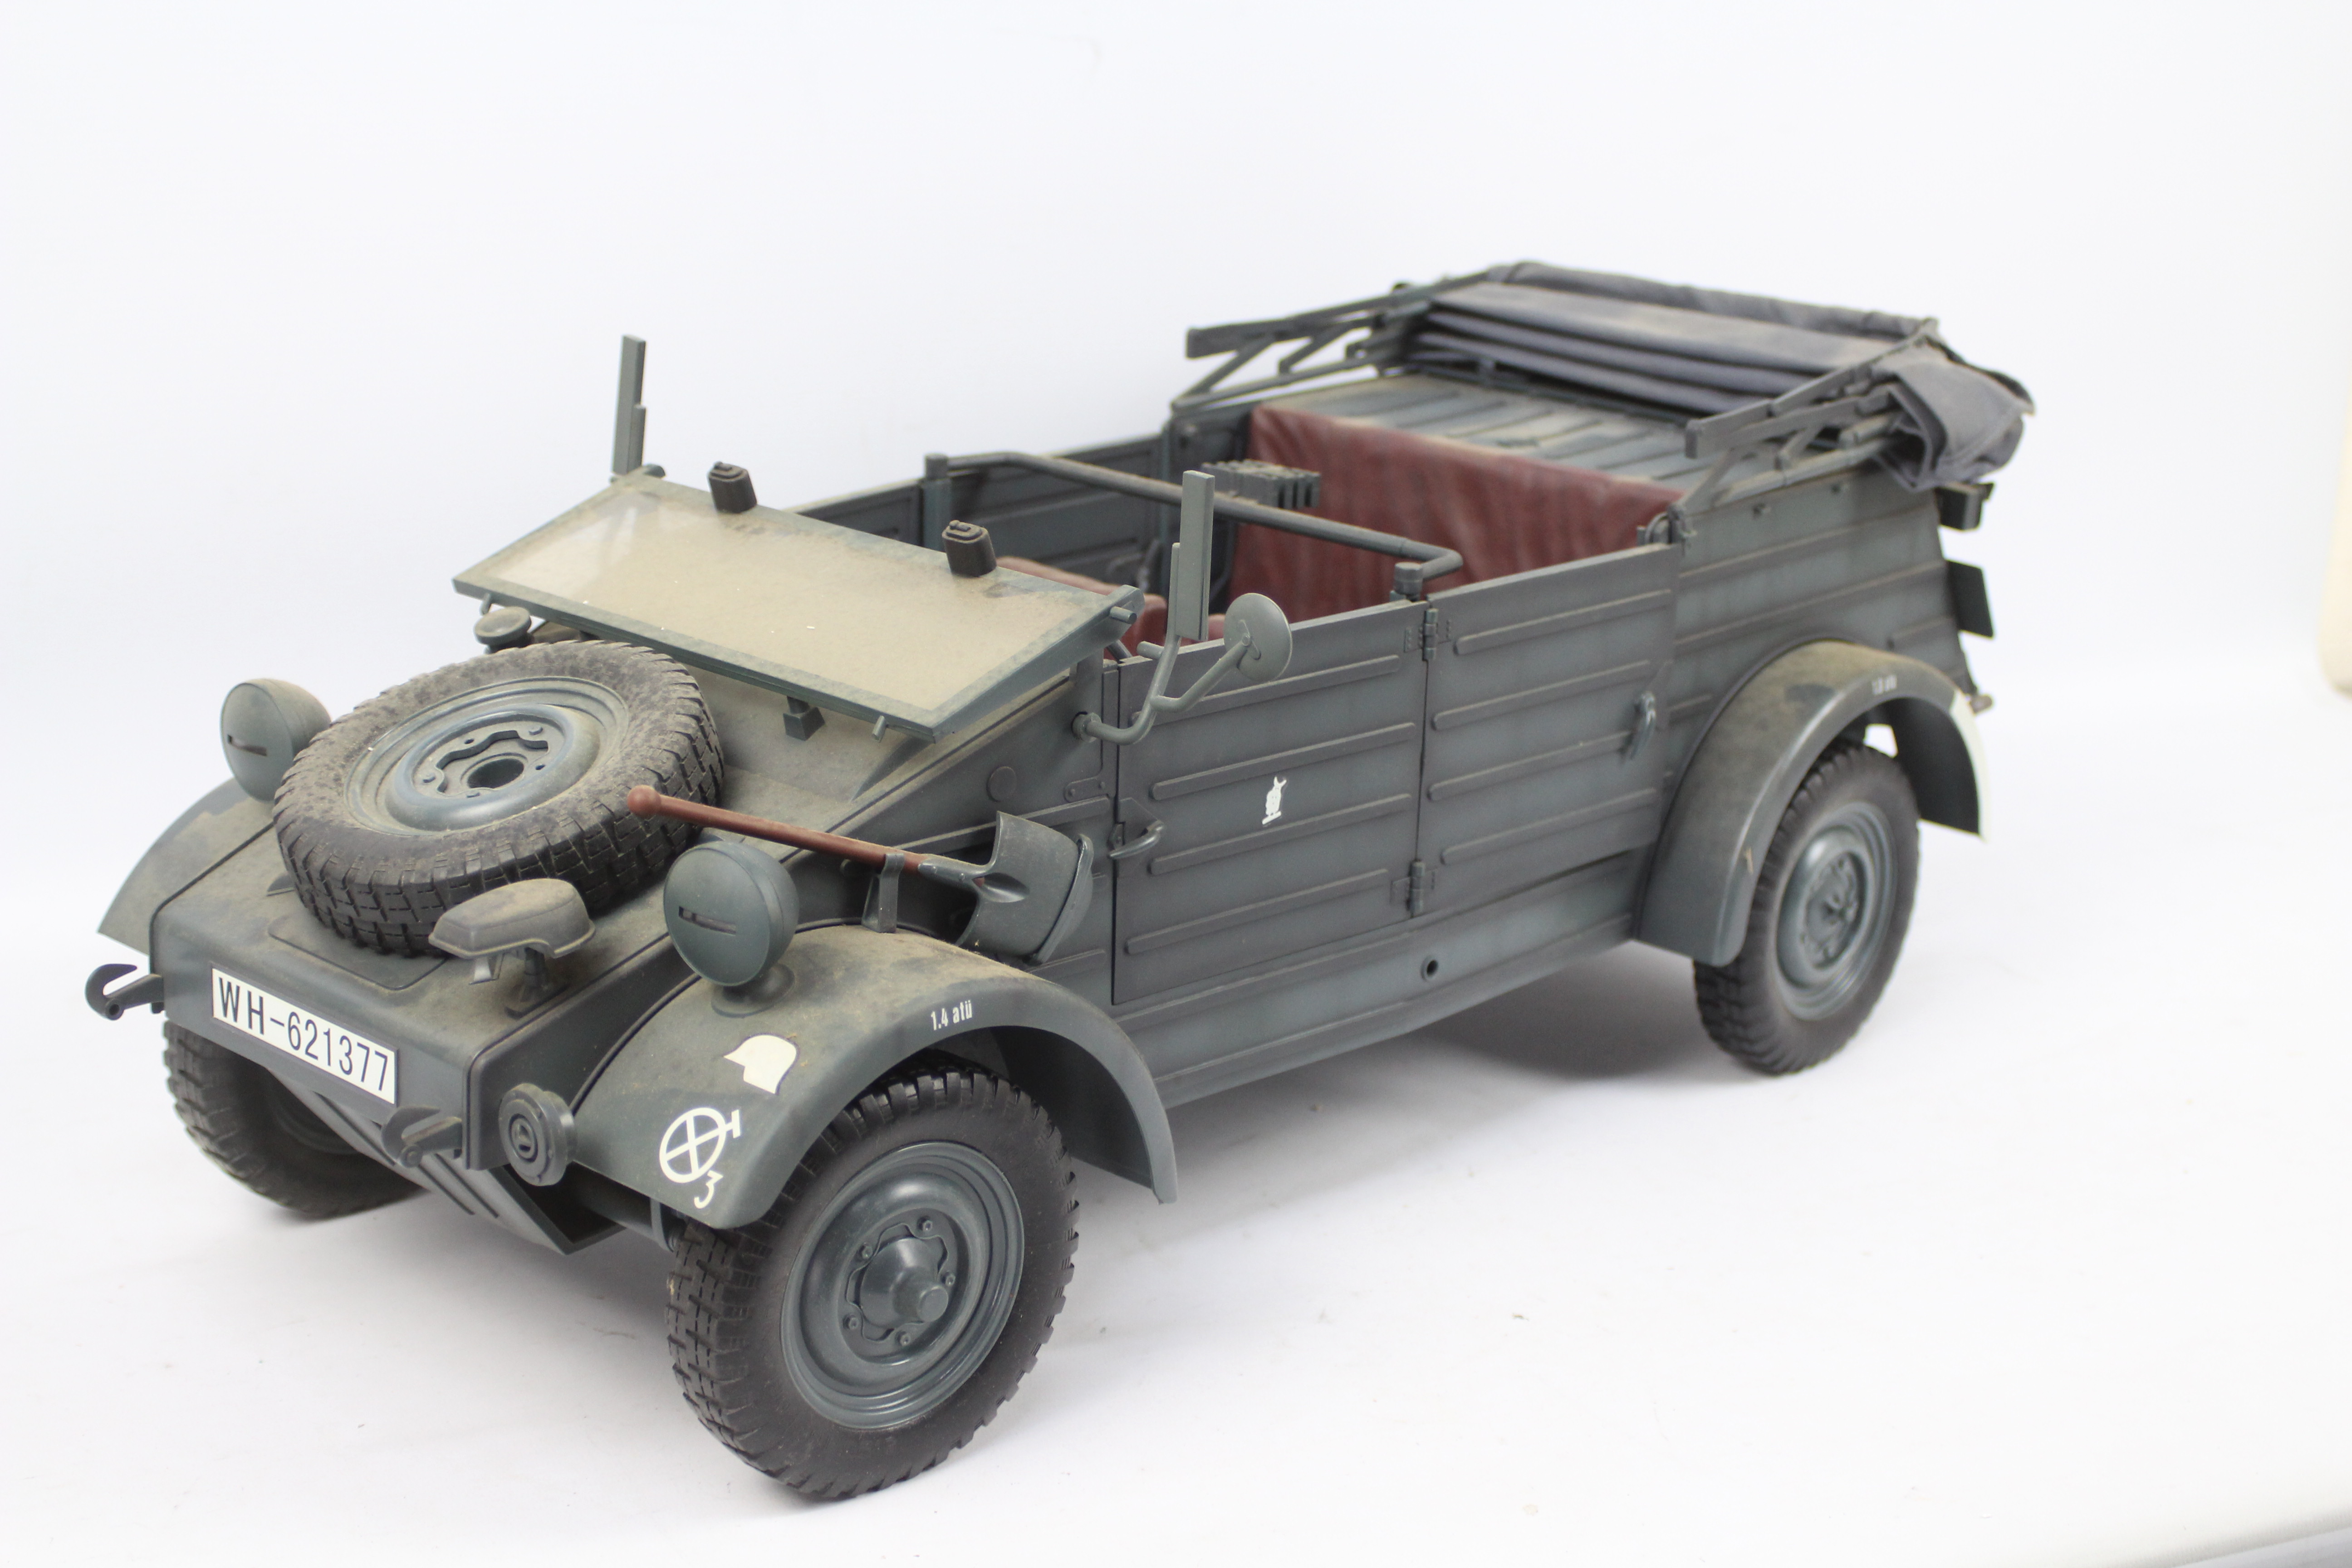 Dragon - A boxed Dragon #710150 WWII German Forces 1:6 scale Kubelwagen Type 82. - Image 3 of 10